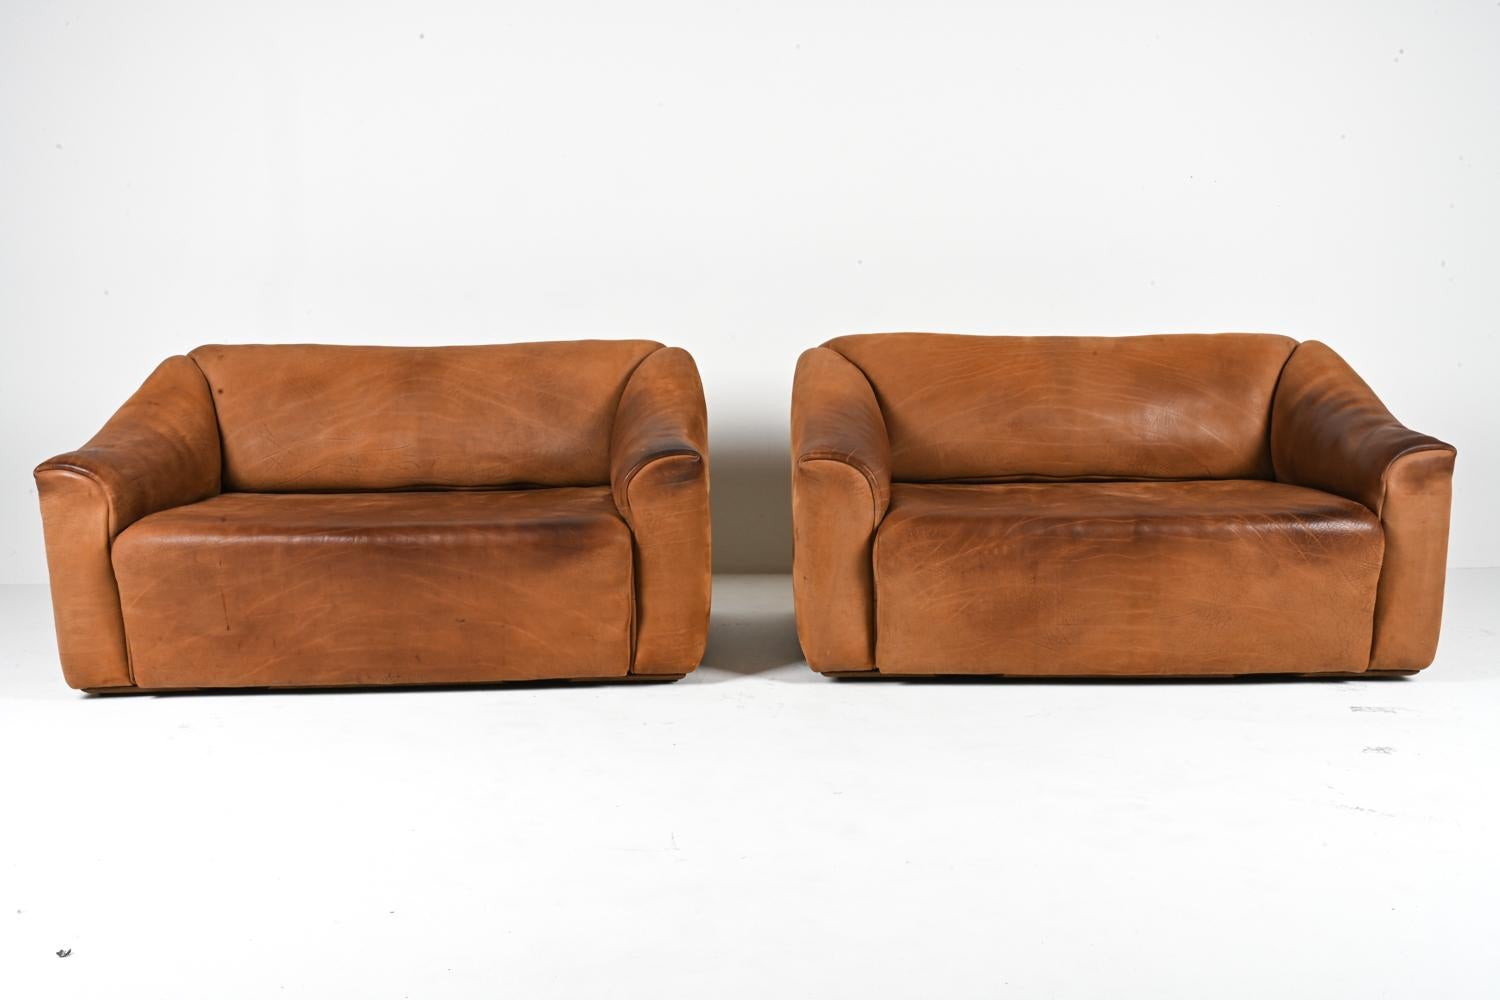 20th Century Pair of De Sede DS-47 Two-Seat Sofas in Nubuck Leather, c. 1970's For Sale